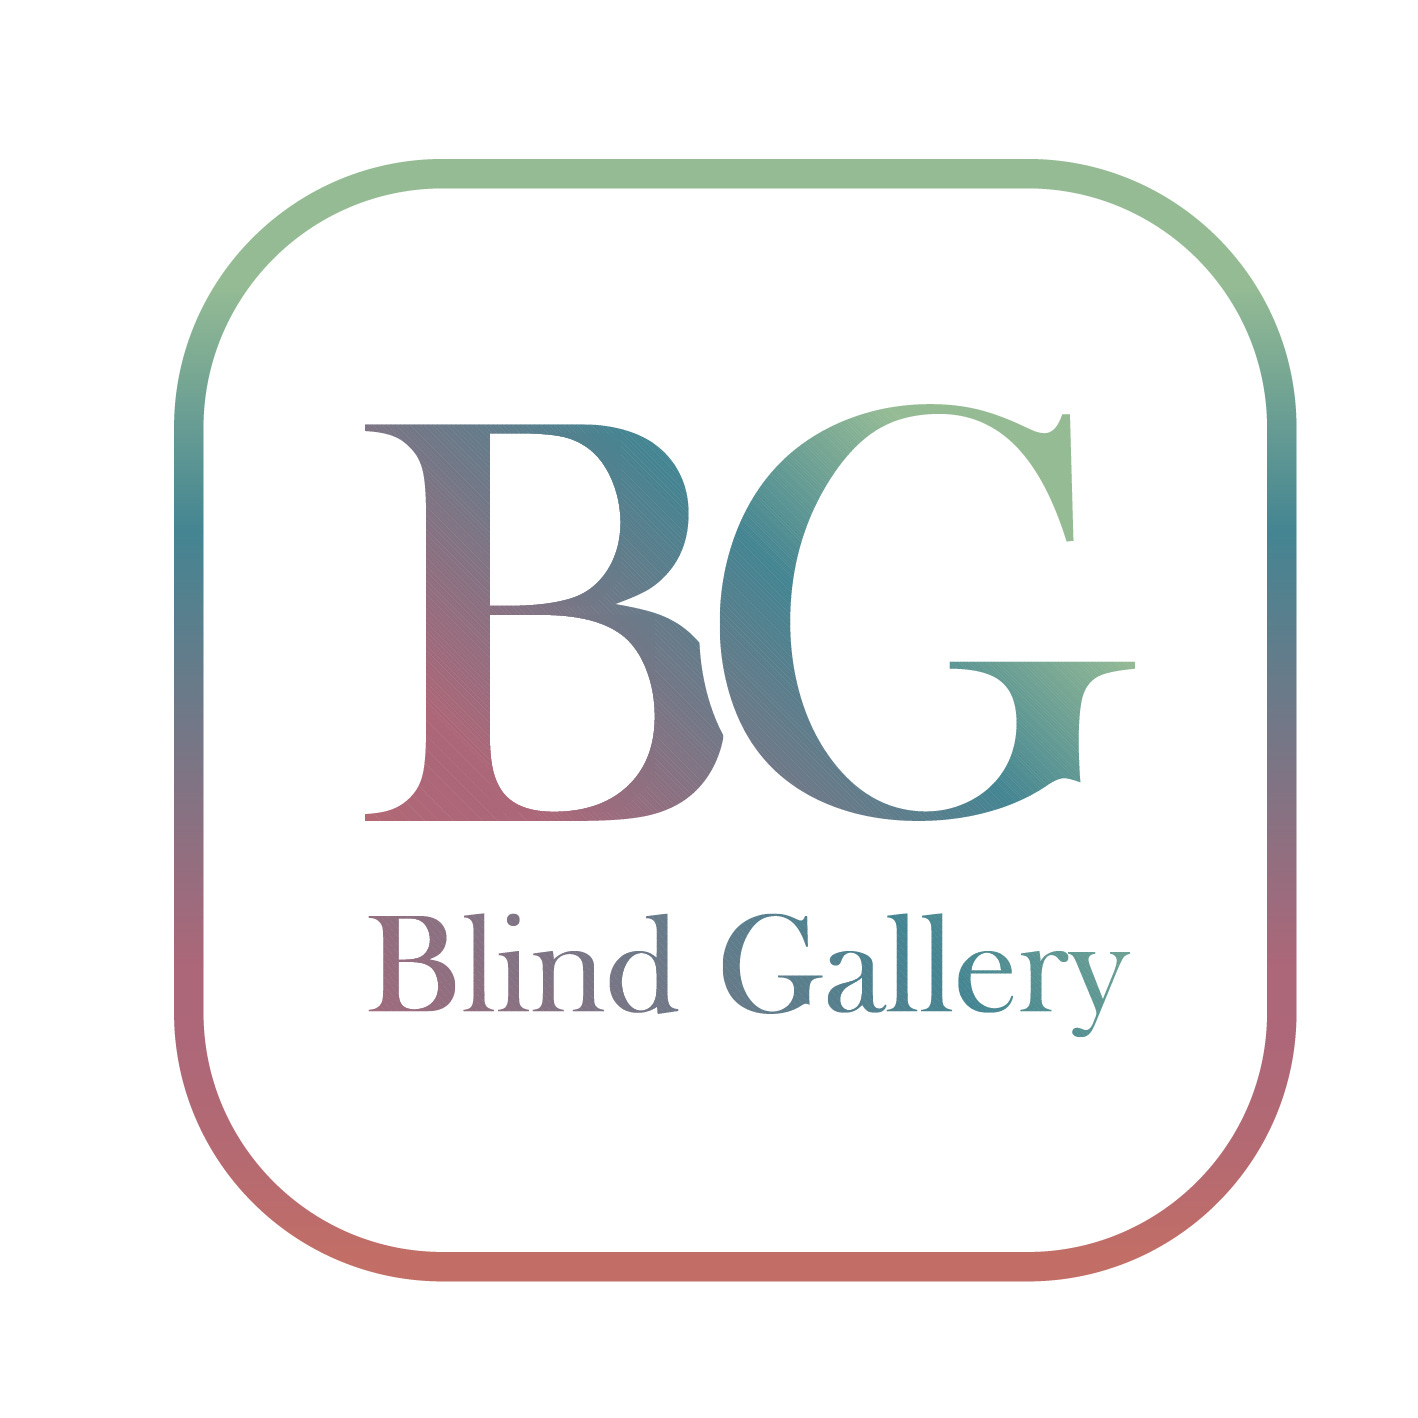 Together with The Blind Gallery